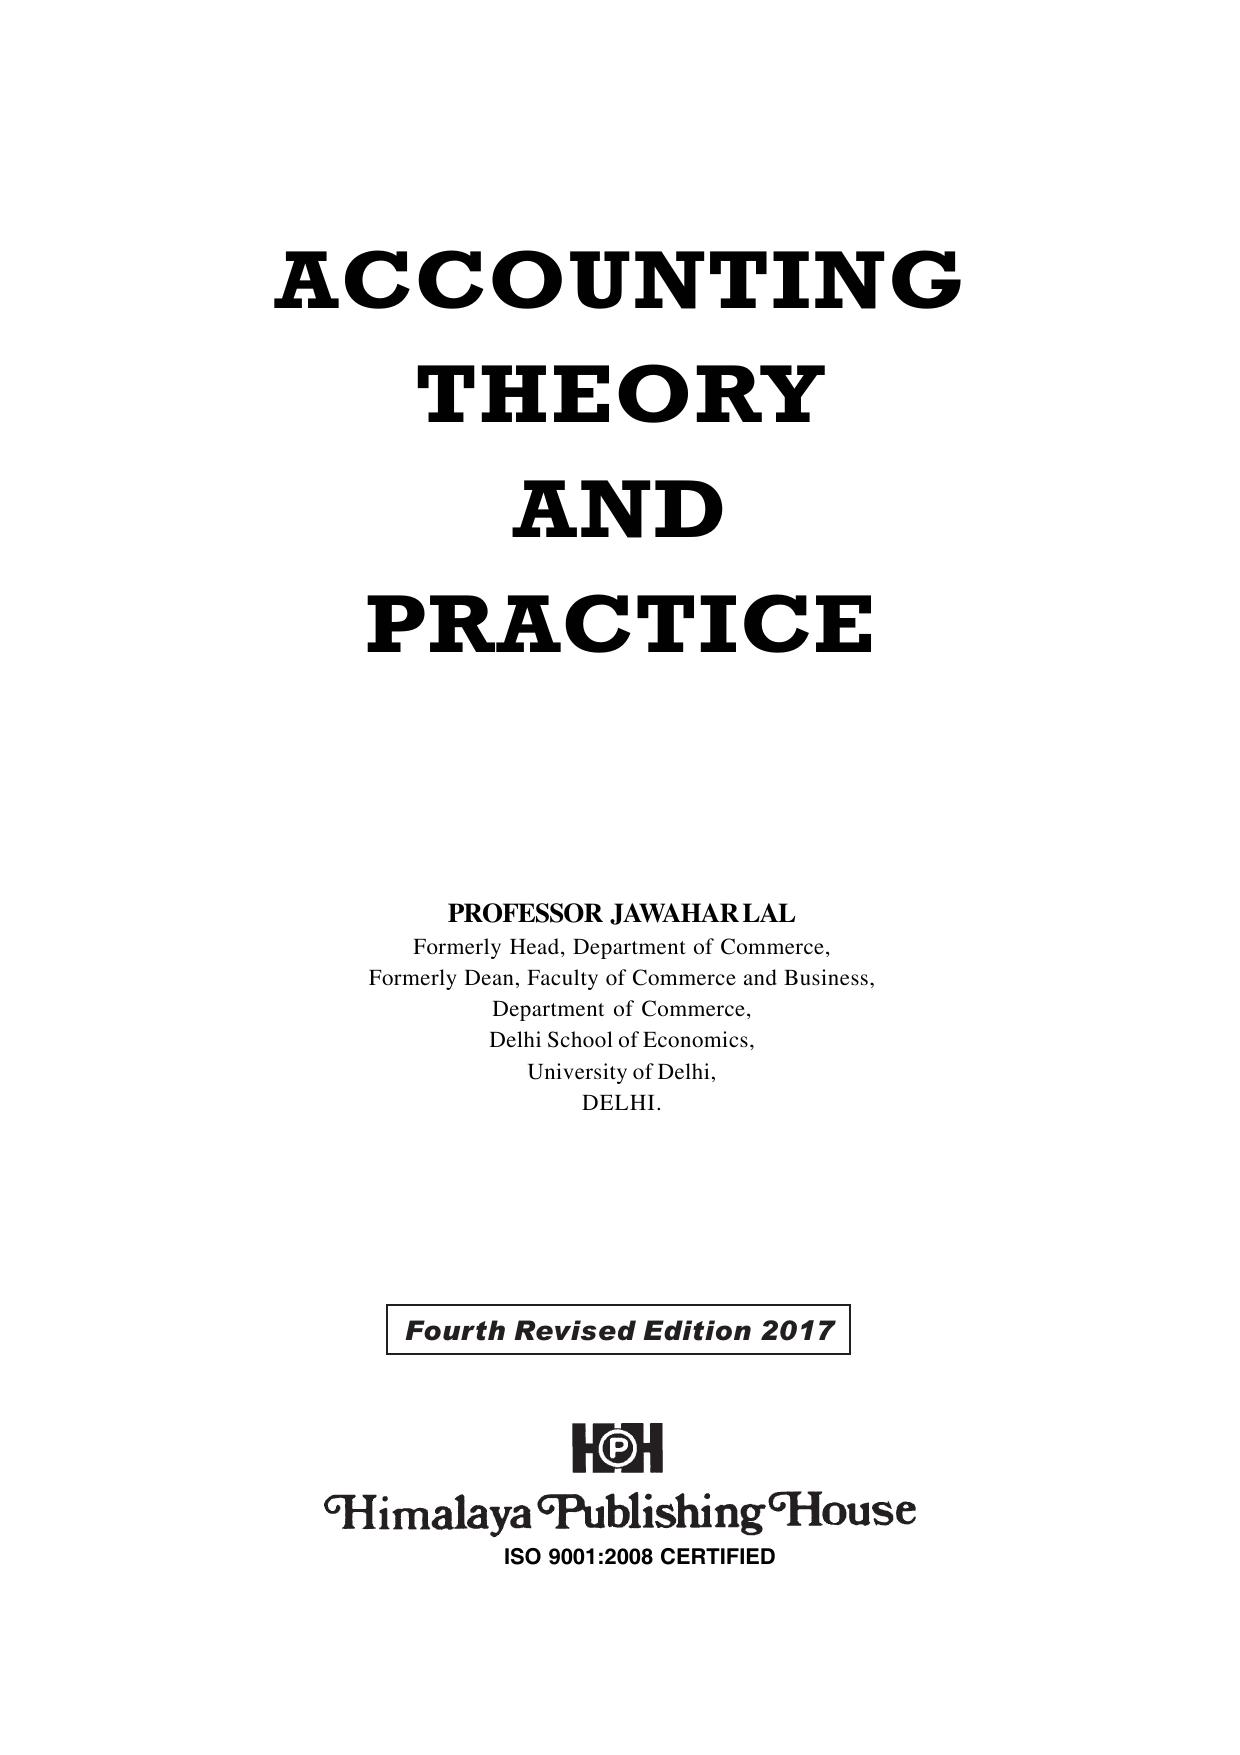 accounting theory and practice ( PDFDrive ) 4th rev. ed 2017